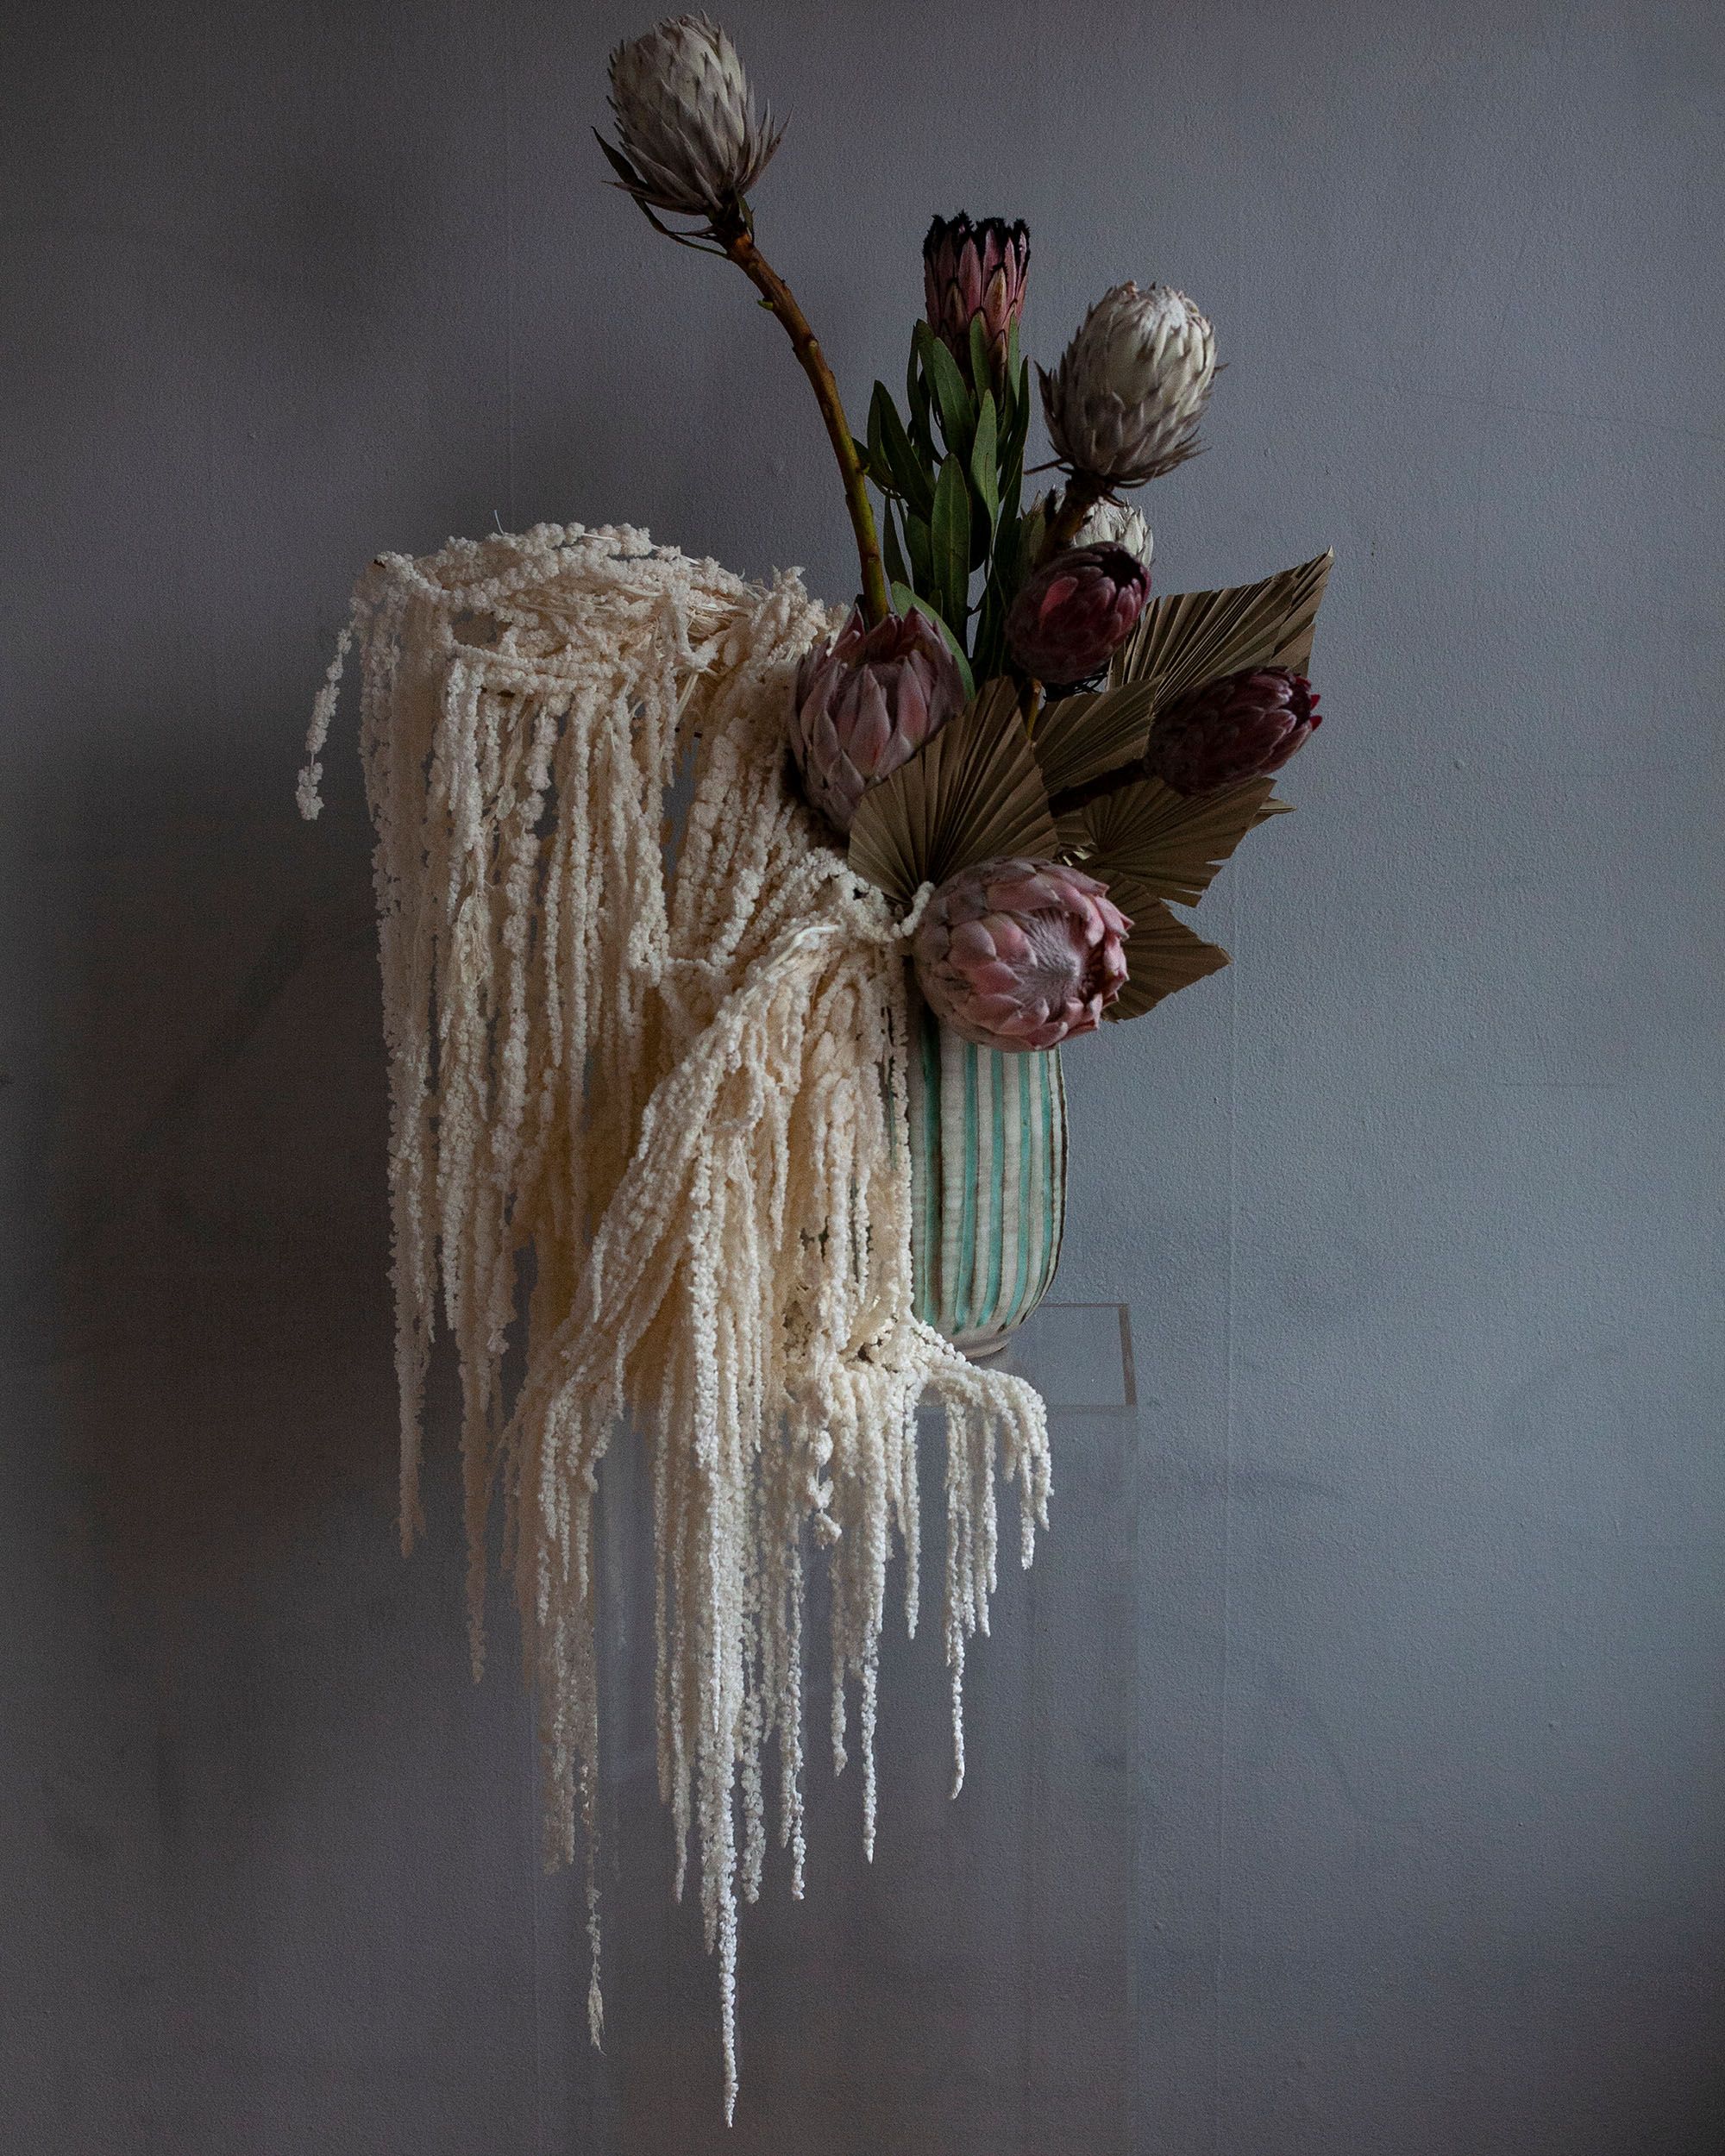 How to Make Dried Floral Arrangements - DIY Dried Flower Bouquet